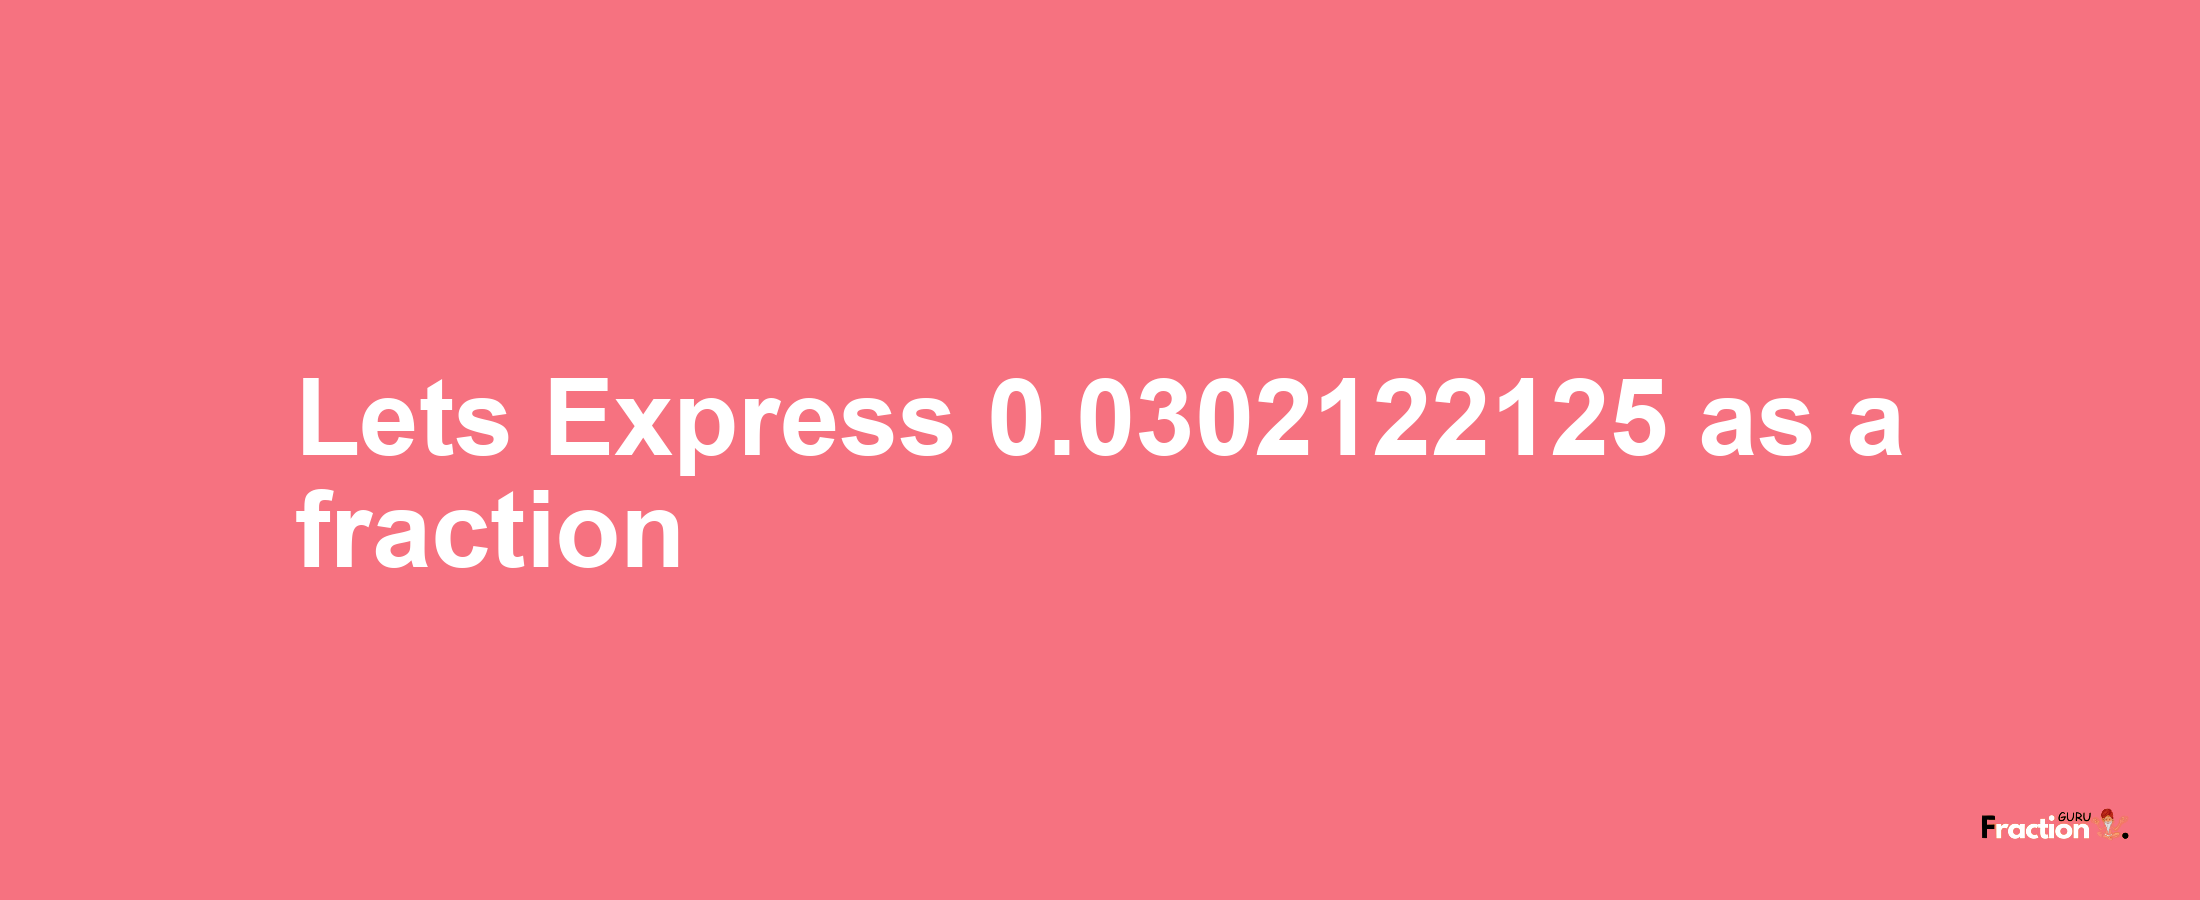 Lets Express 0.0302122125 as afraction